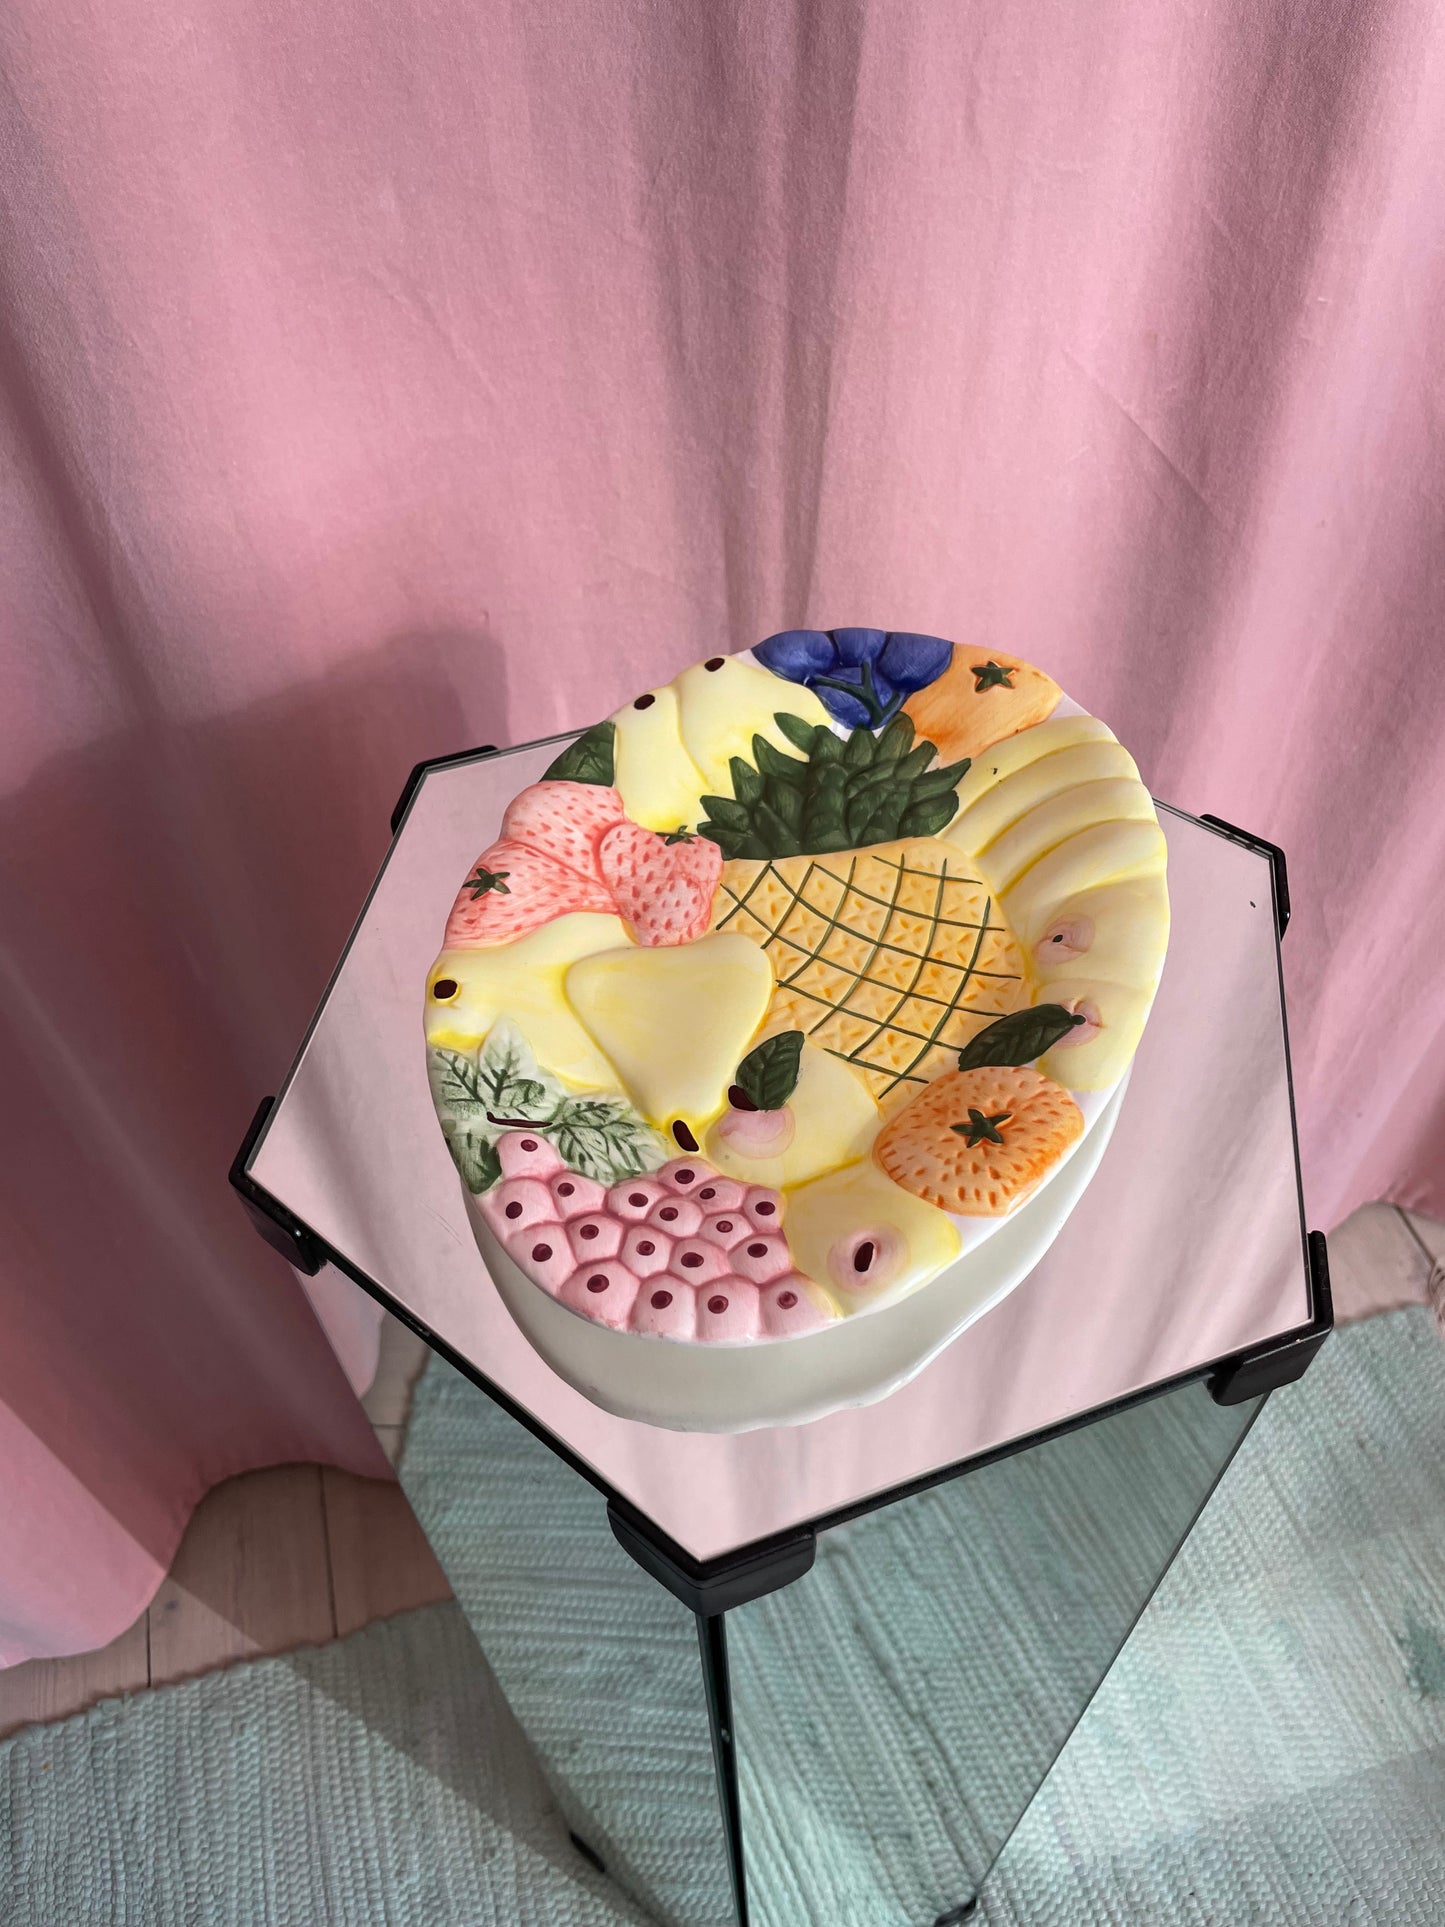 The fruit plate